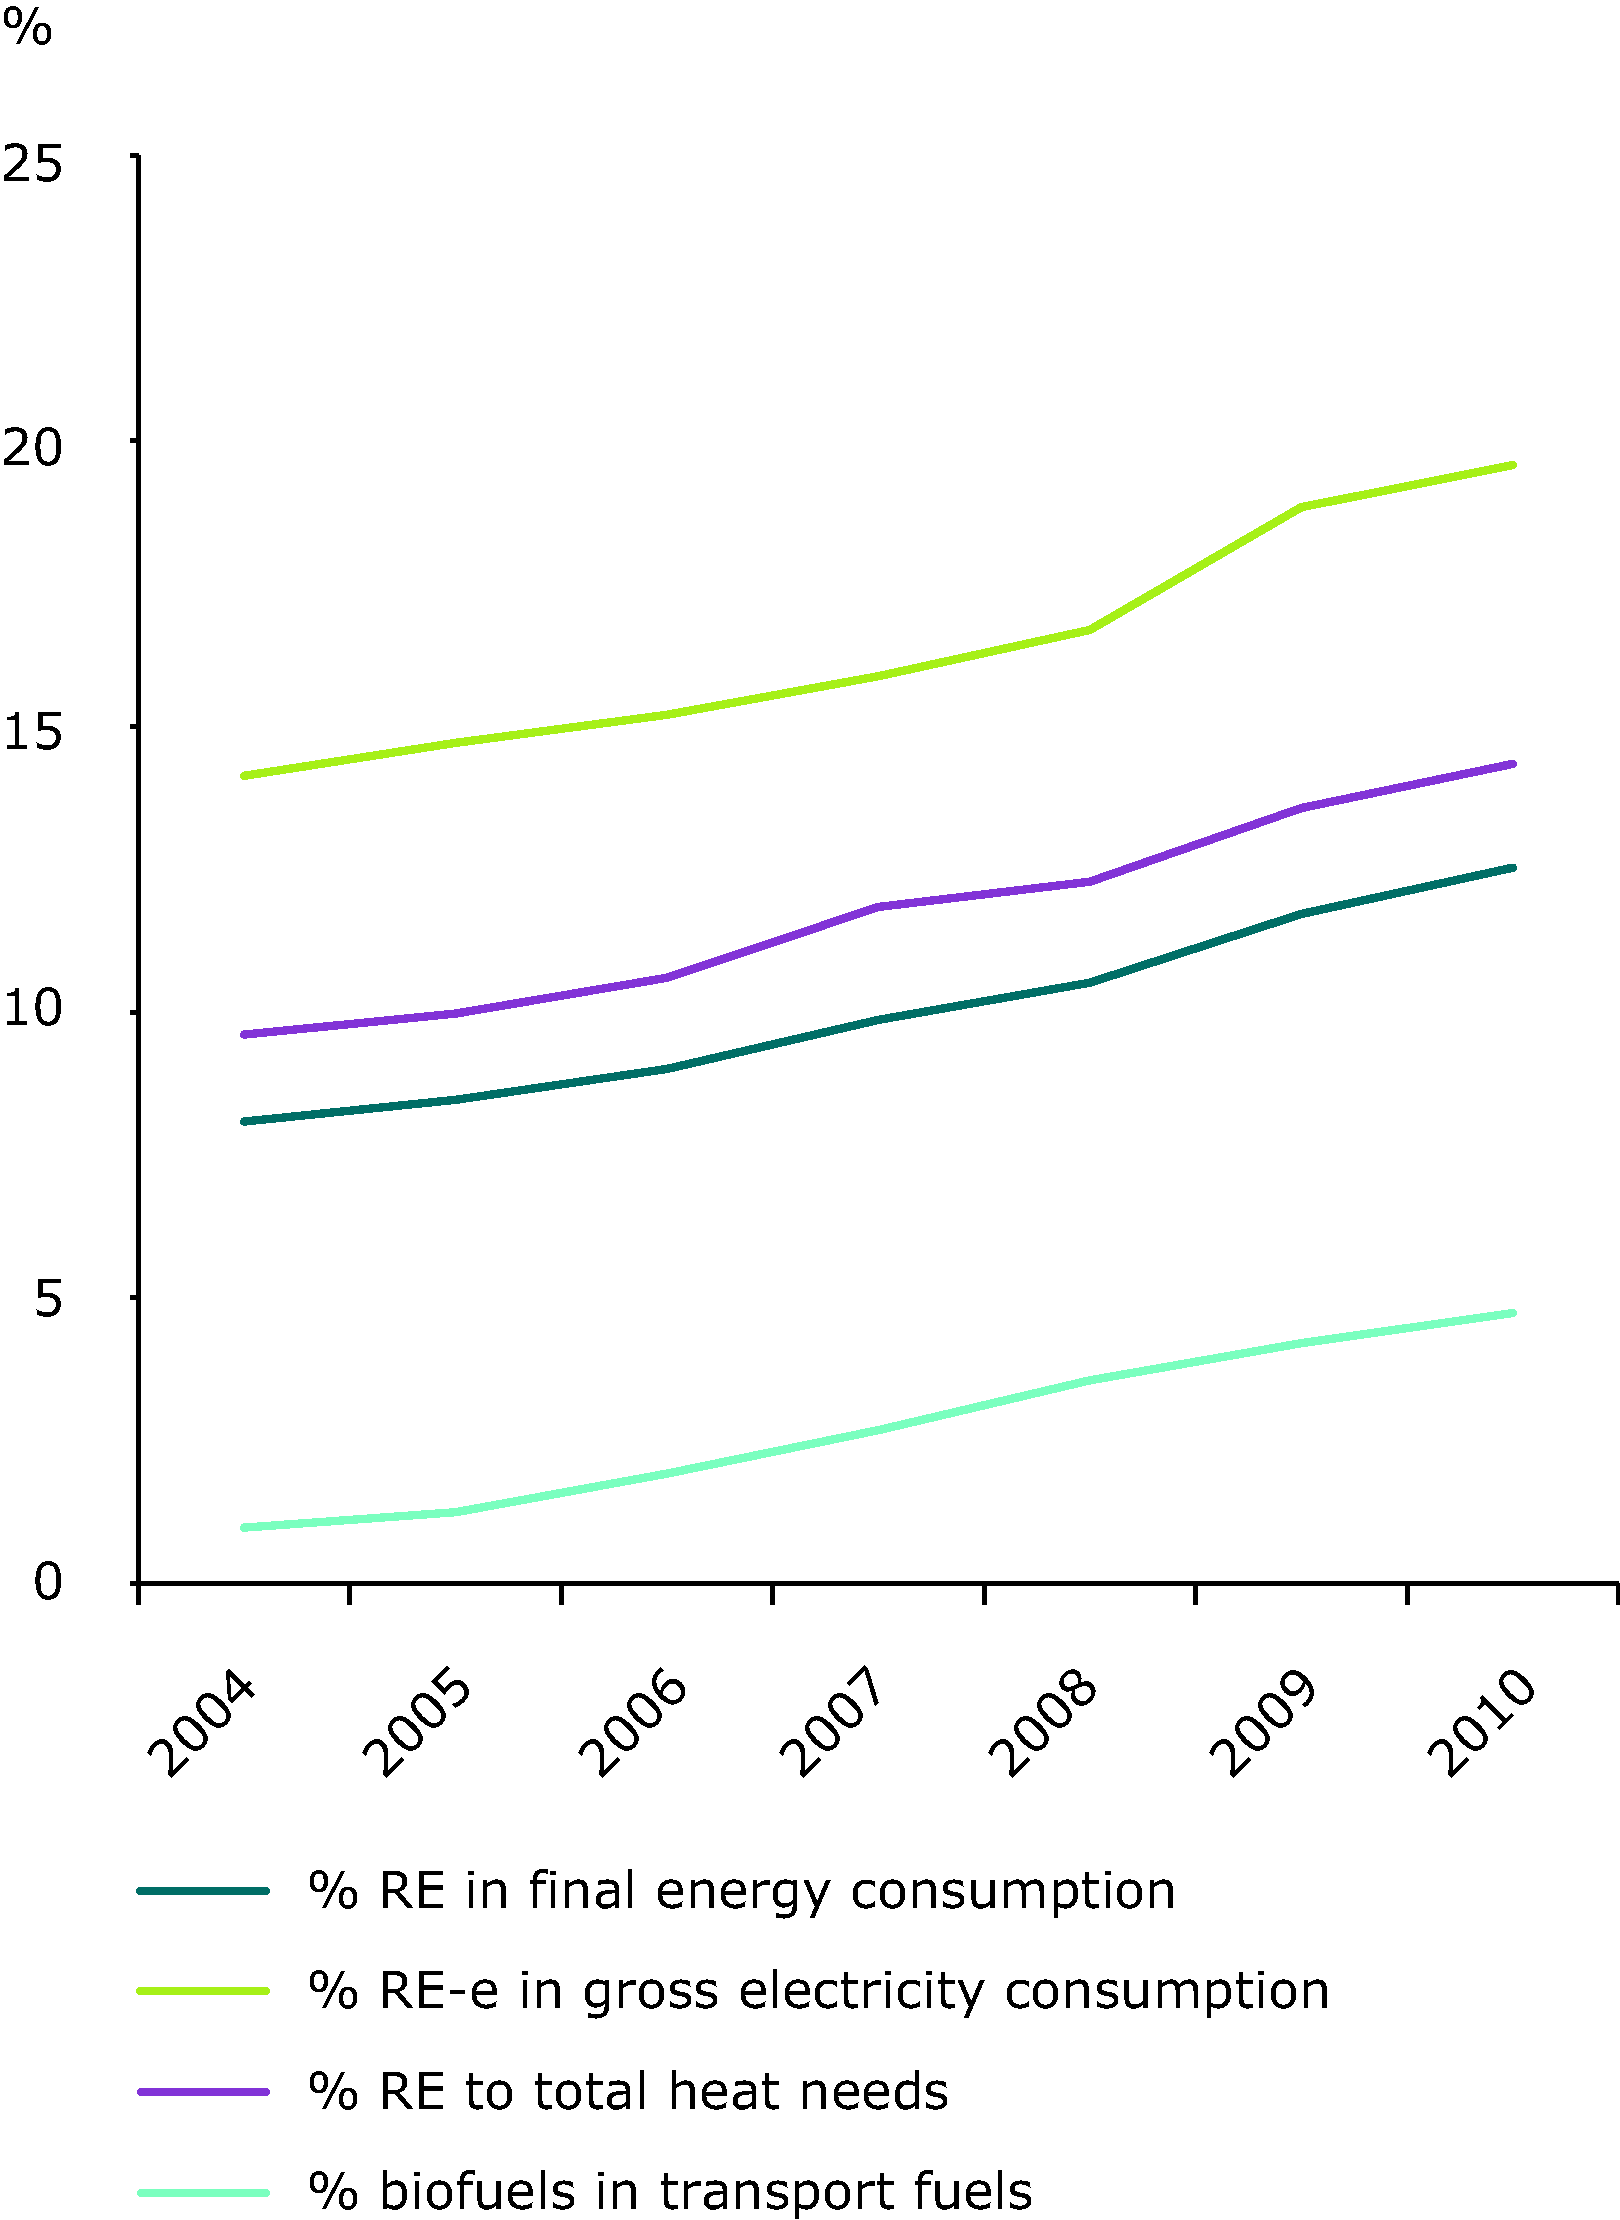 Share of renewable energy to final energy consumption